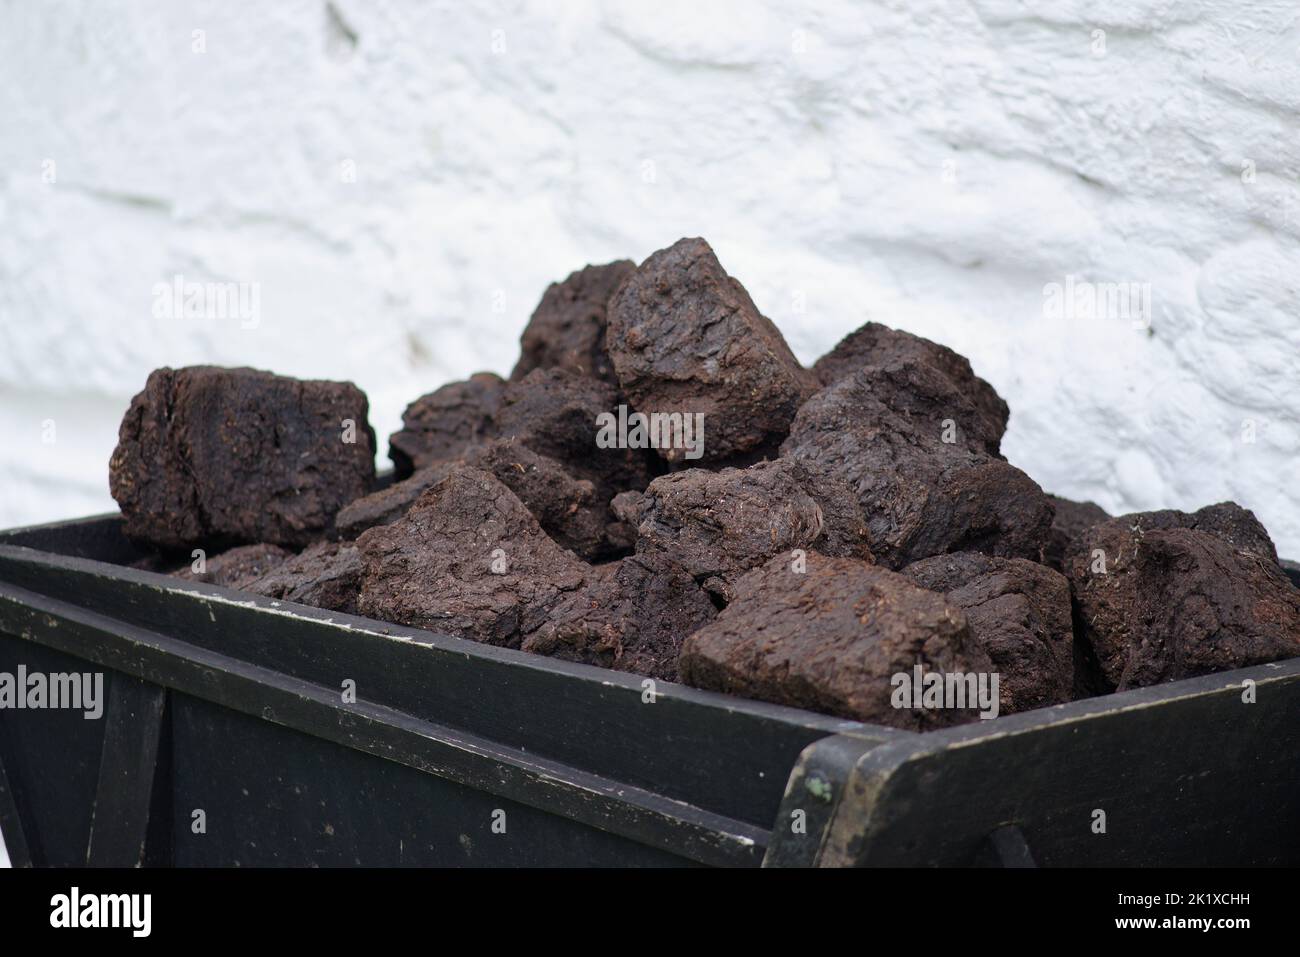 Cut peat from a peat bog ready to burn in the fireplace. Slices of peat that has been dried and ready to heat a cottage and cook above. Stock Photo